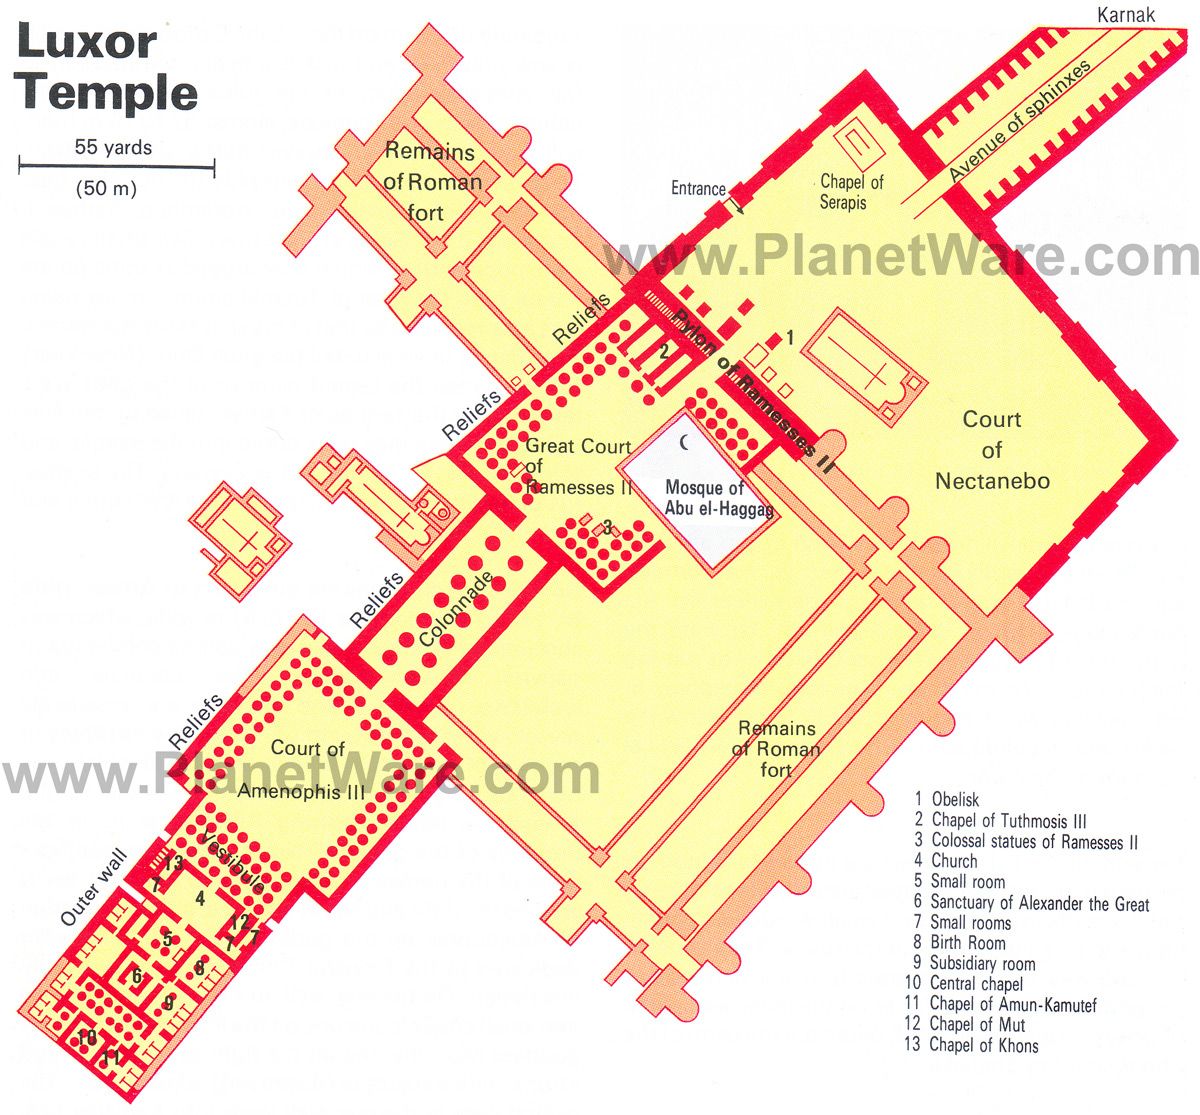 Luxor Temple Floor plan map Kemit Temples and Tombs